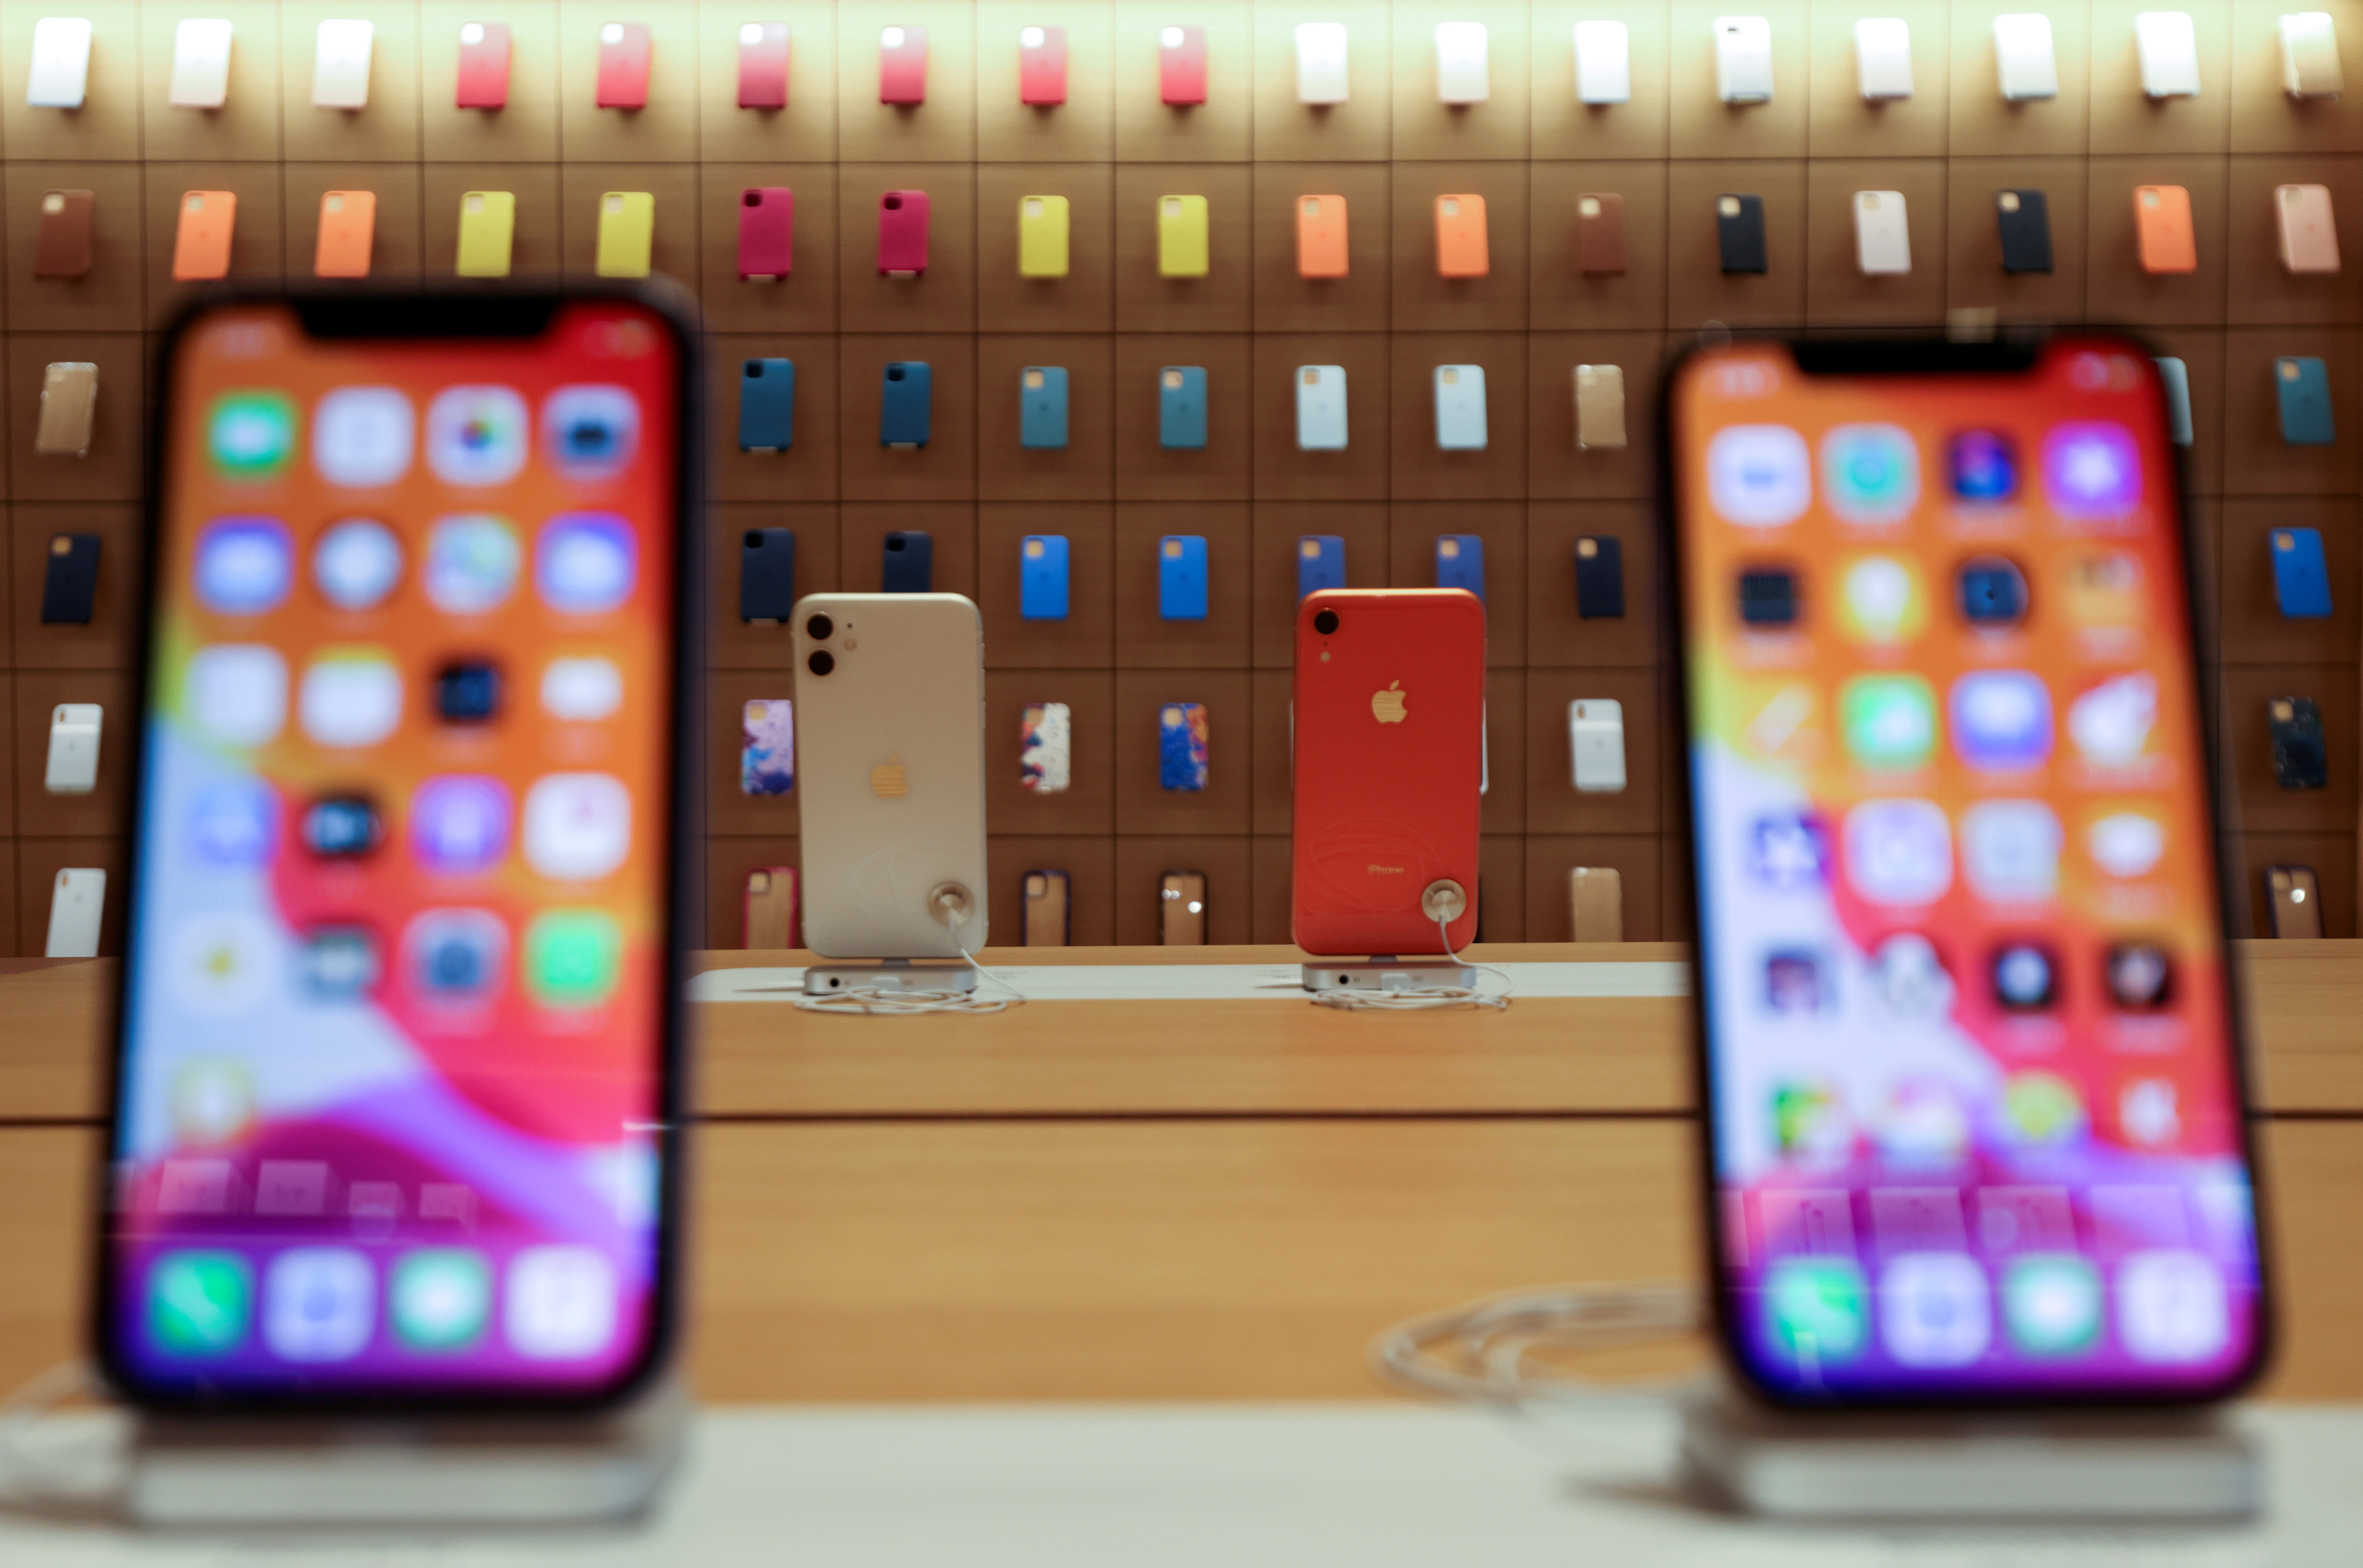 IPhones are displayed at the upcoming Apple Marina Bay Sands store in Singapore, September 8, 2020.